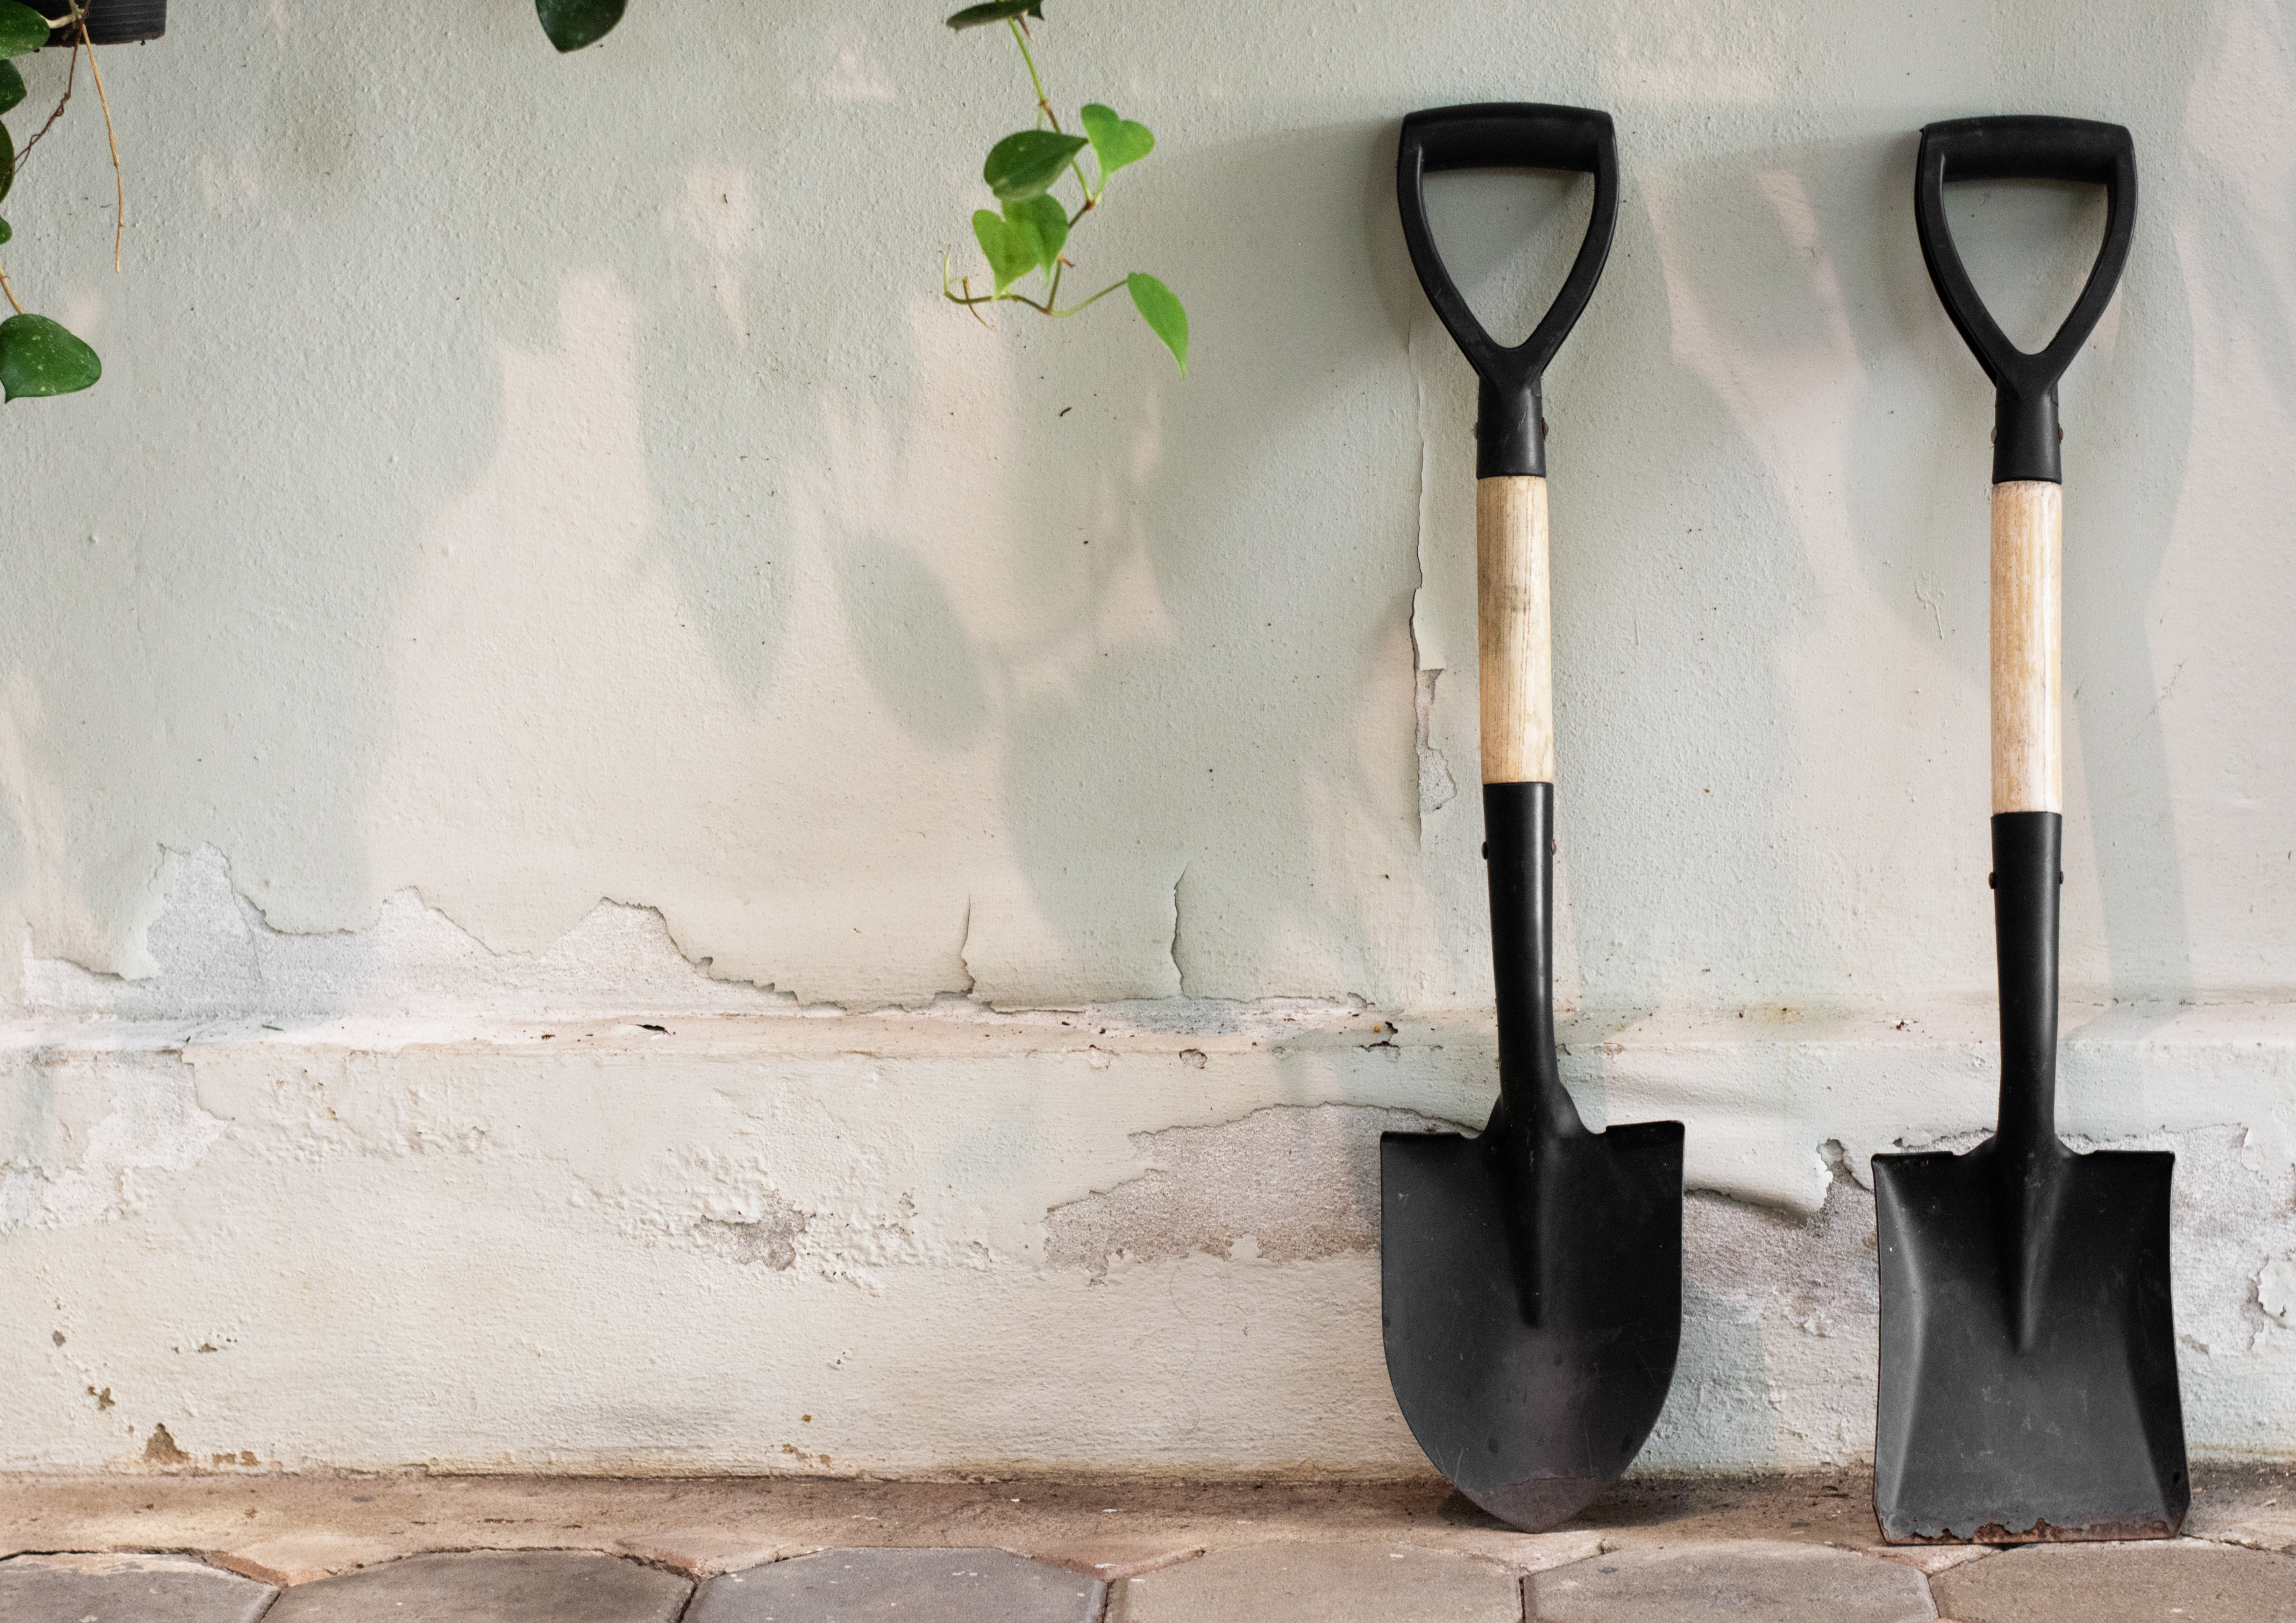 Two differently shaped garden shovels propped up against a white garden wall with some vines